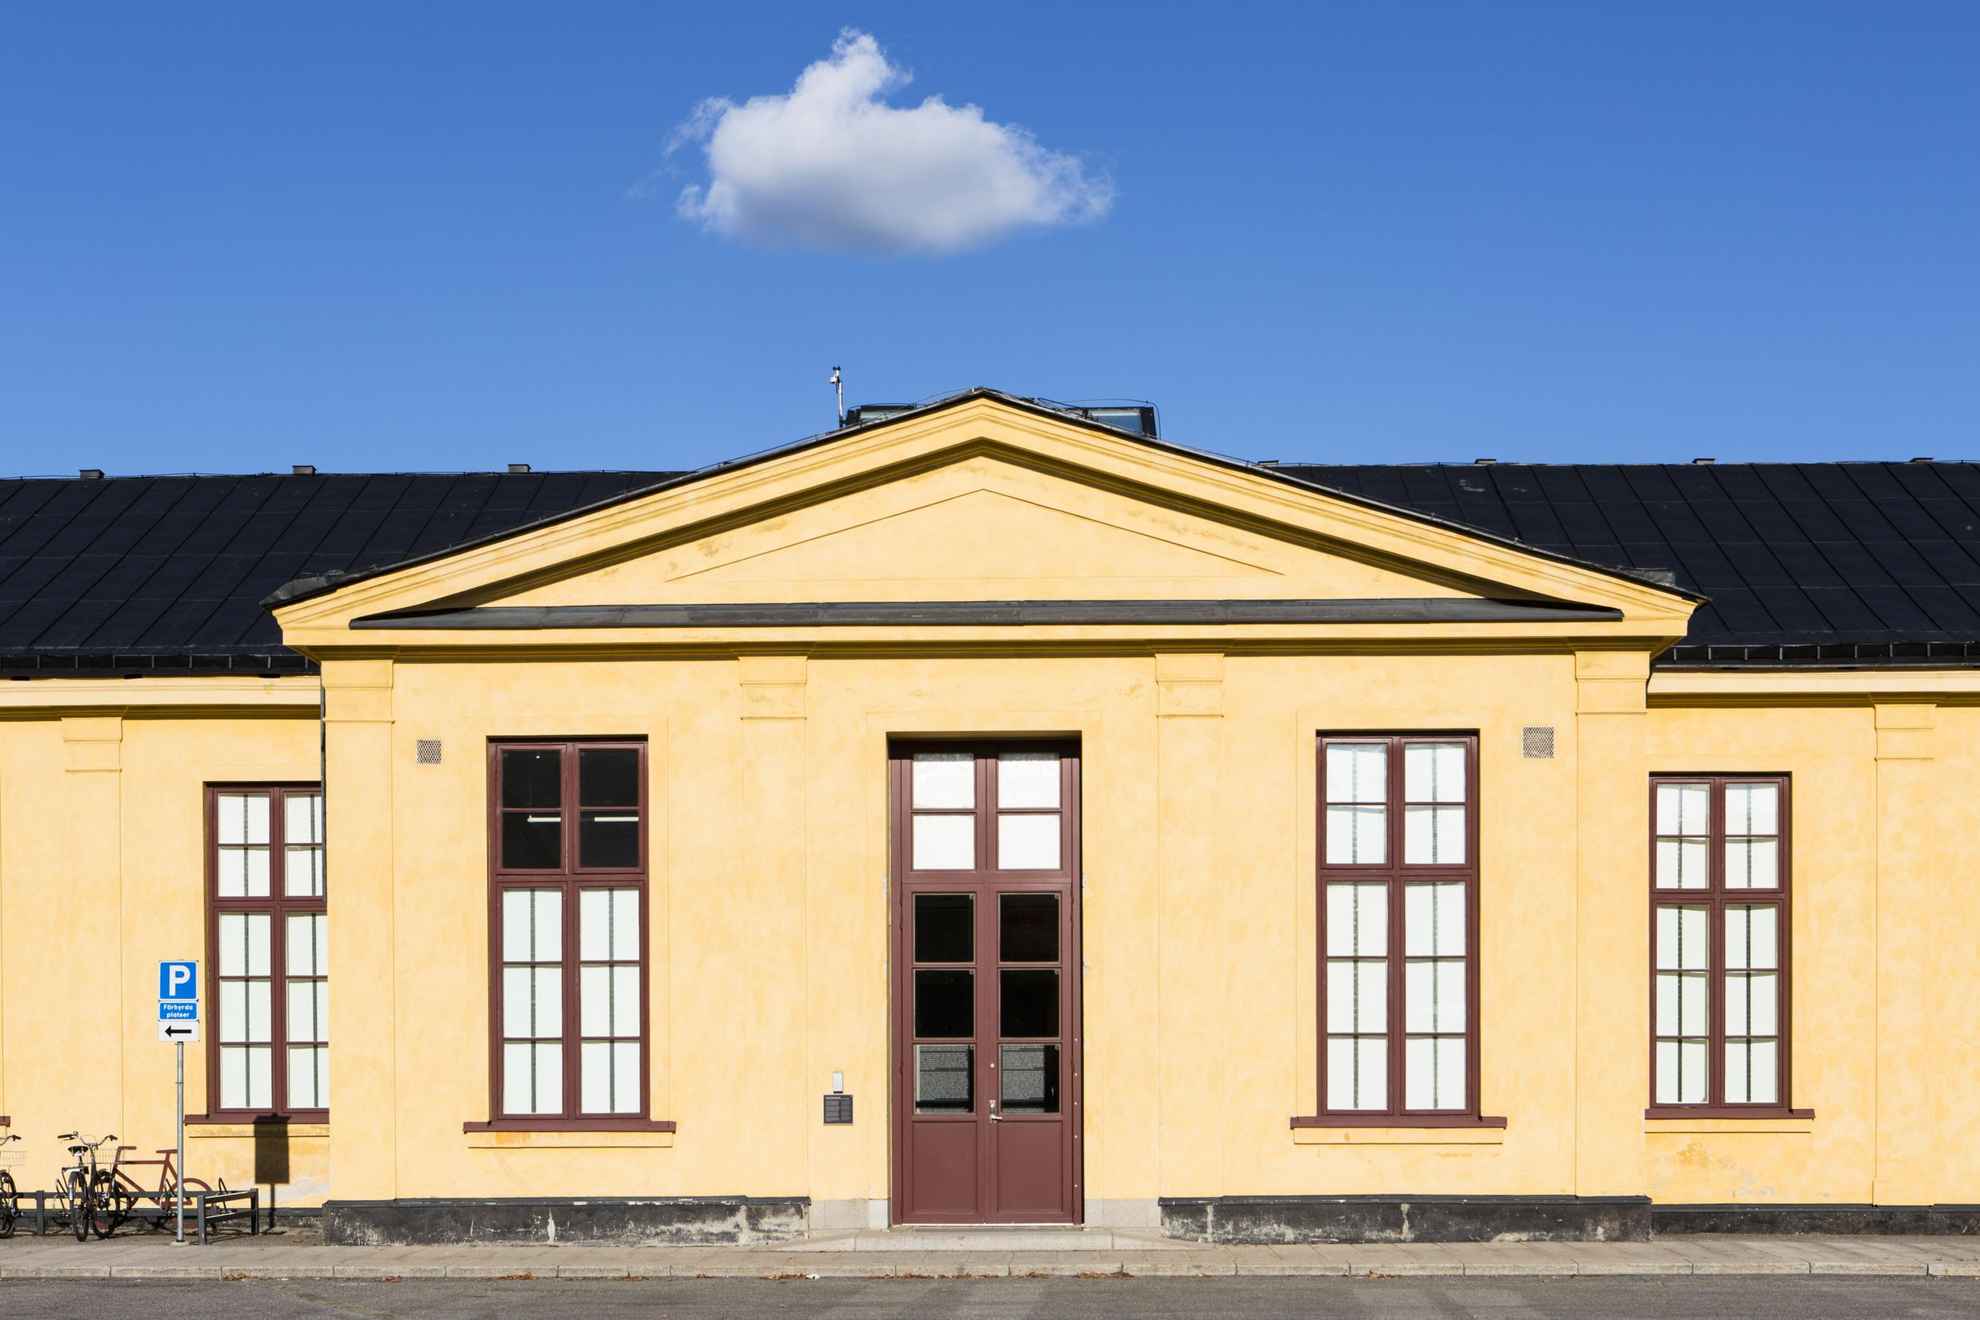 The exterior of a light yellow building with burgundy mullioned windows and a double door.